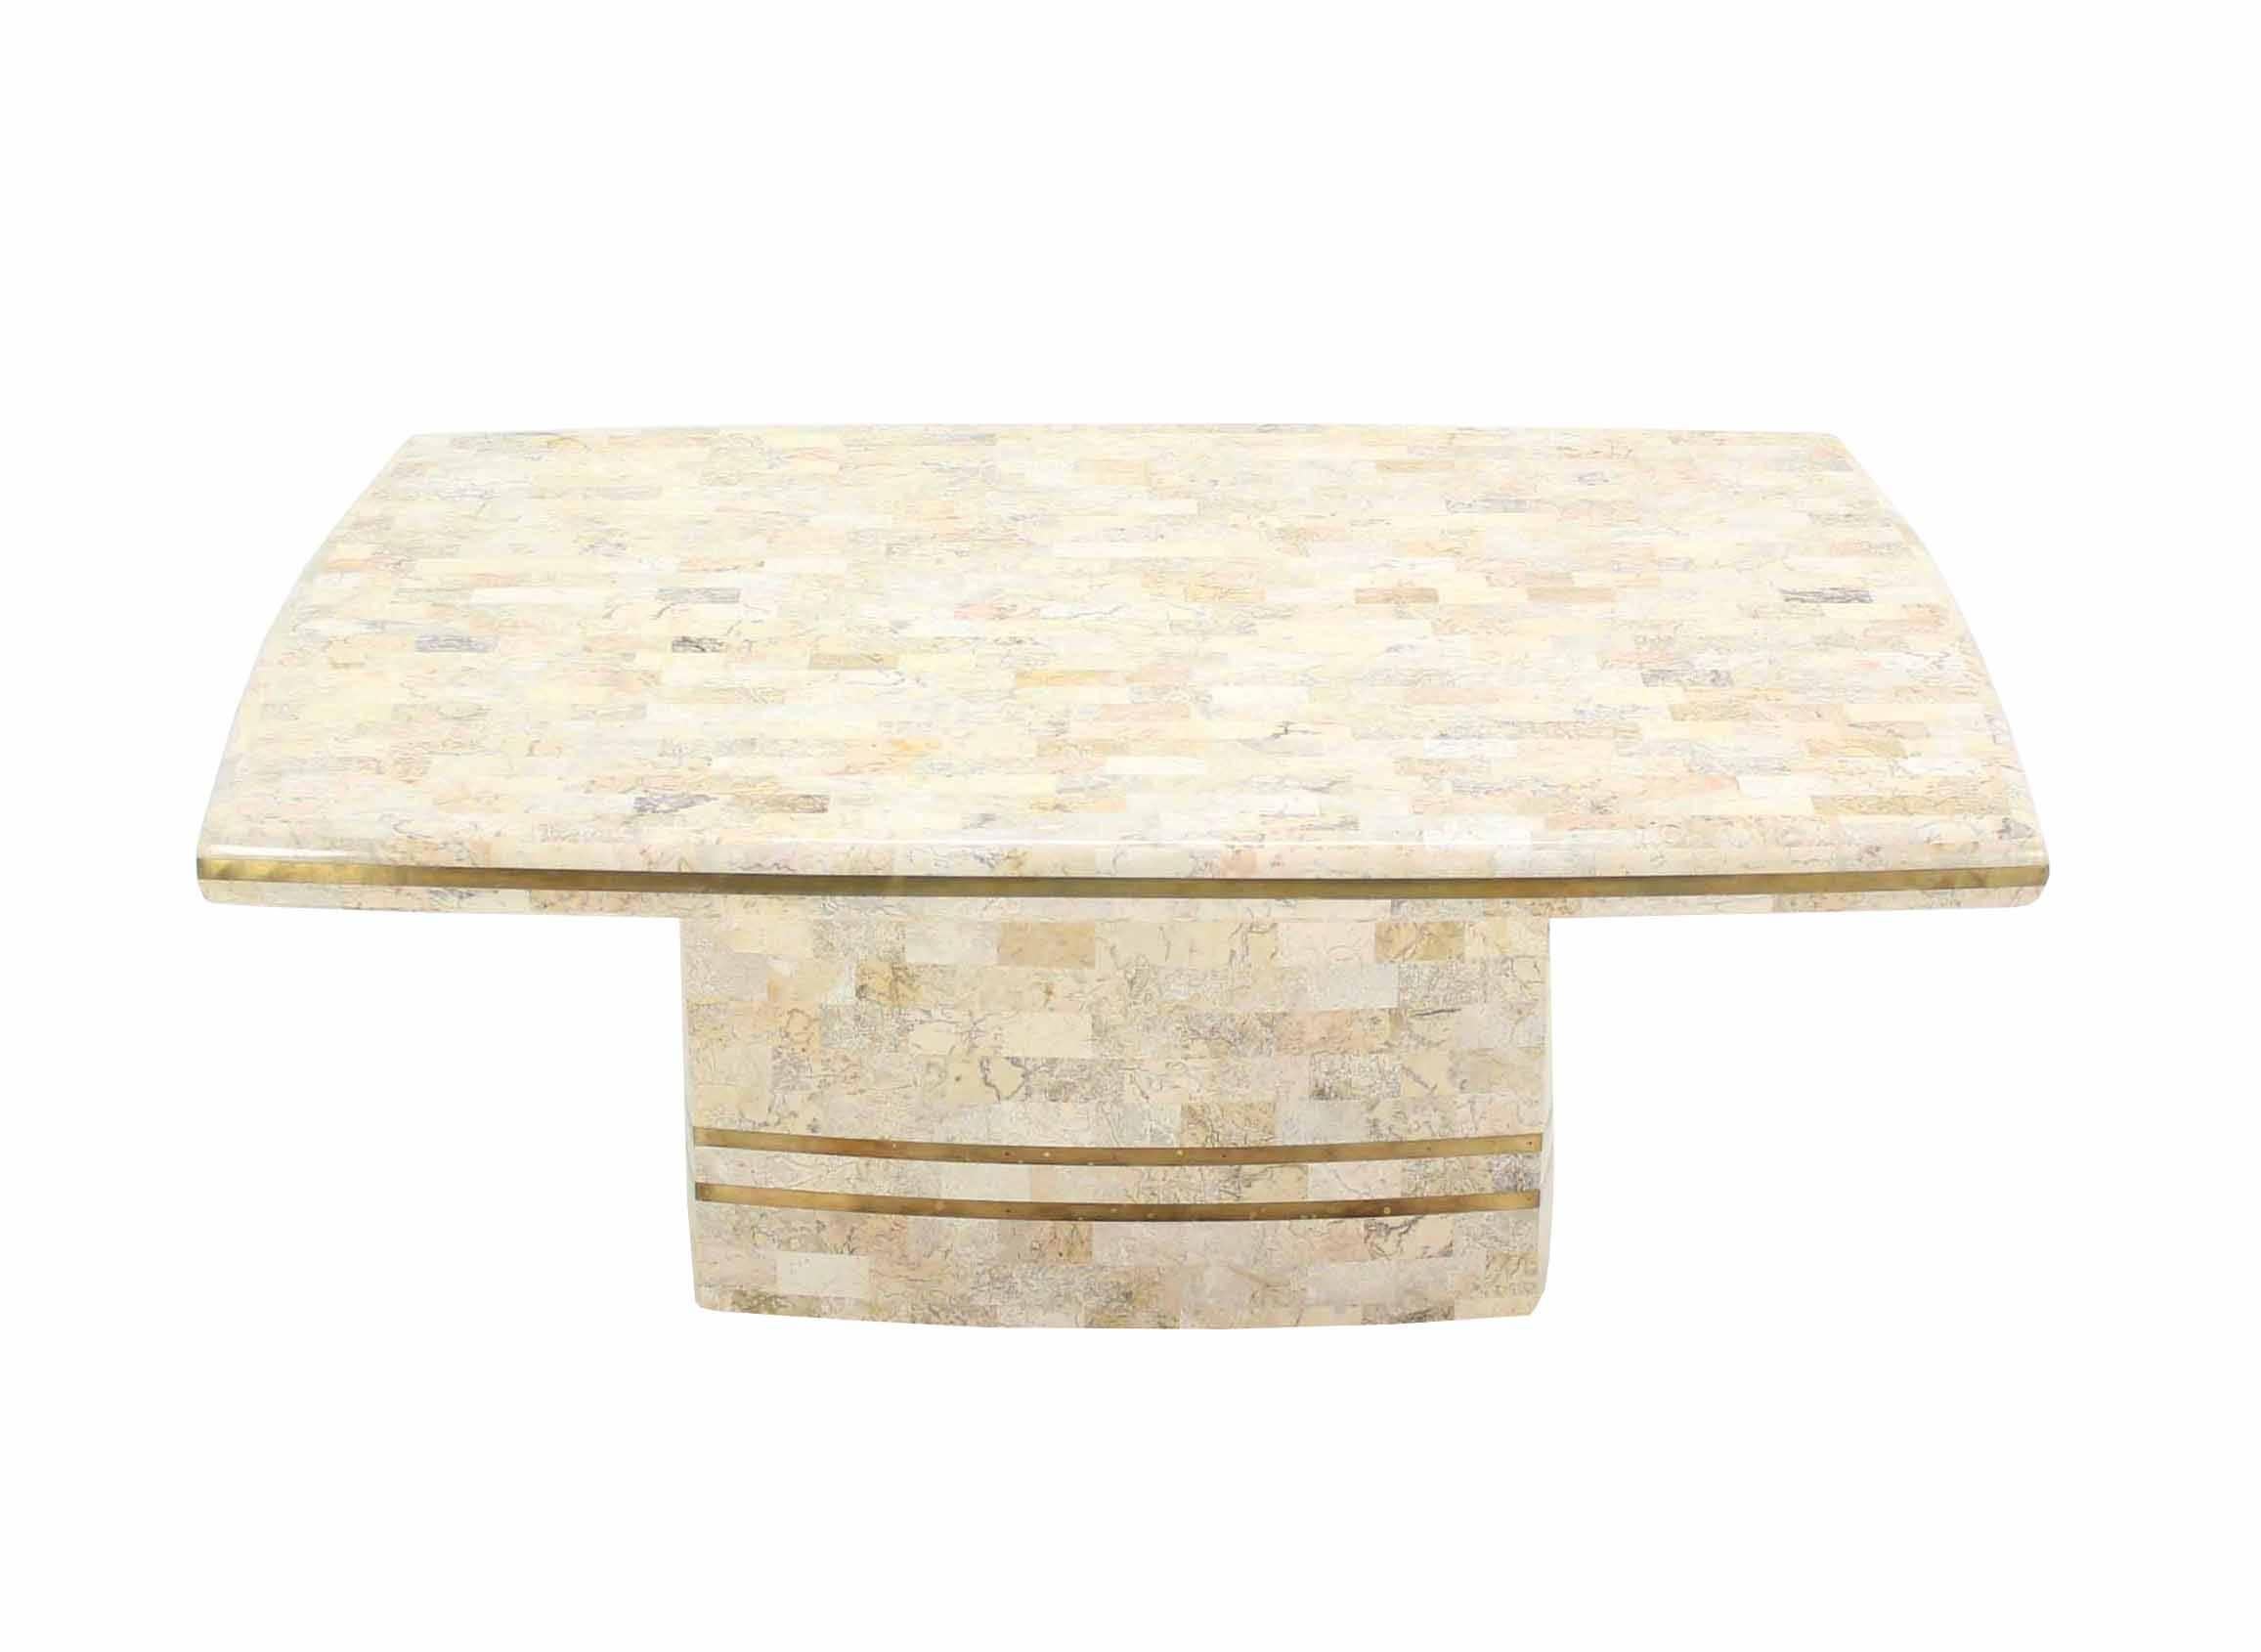  Mid Century Modern tessel stone work rounded edge square coffee table by Maitland Smith.